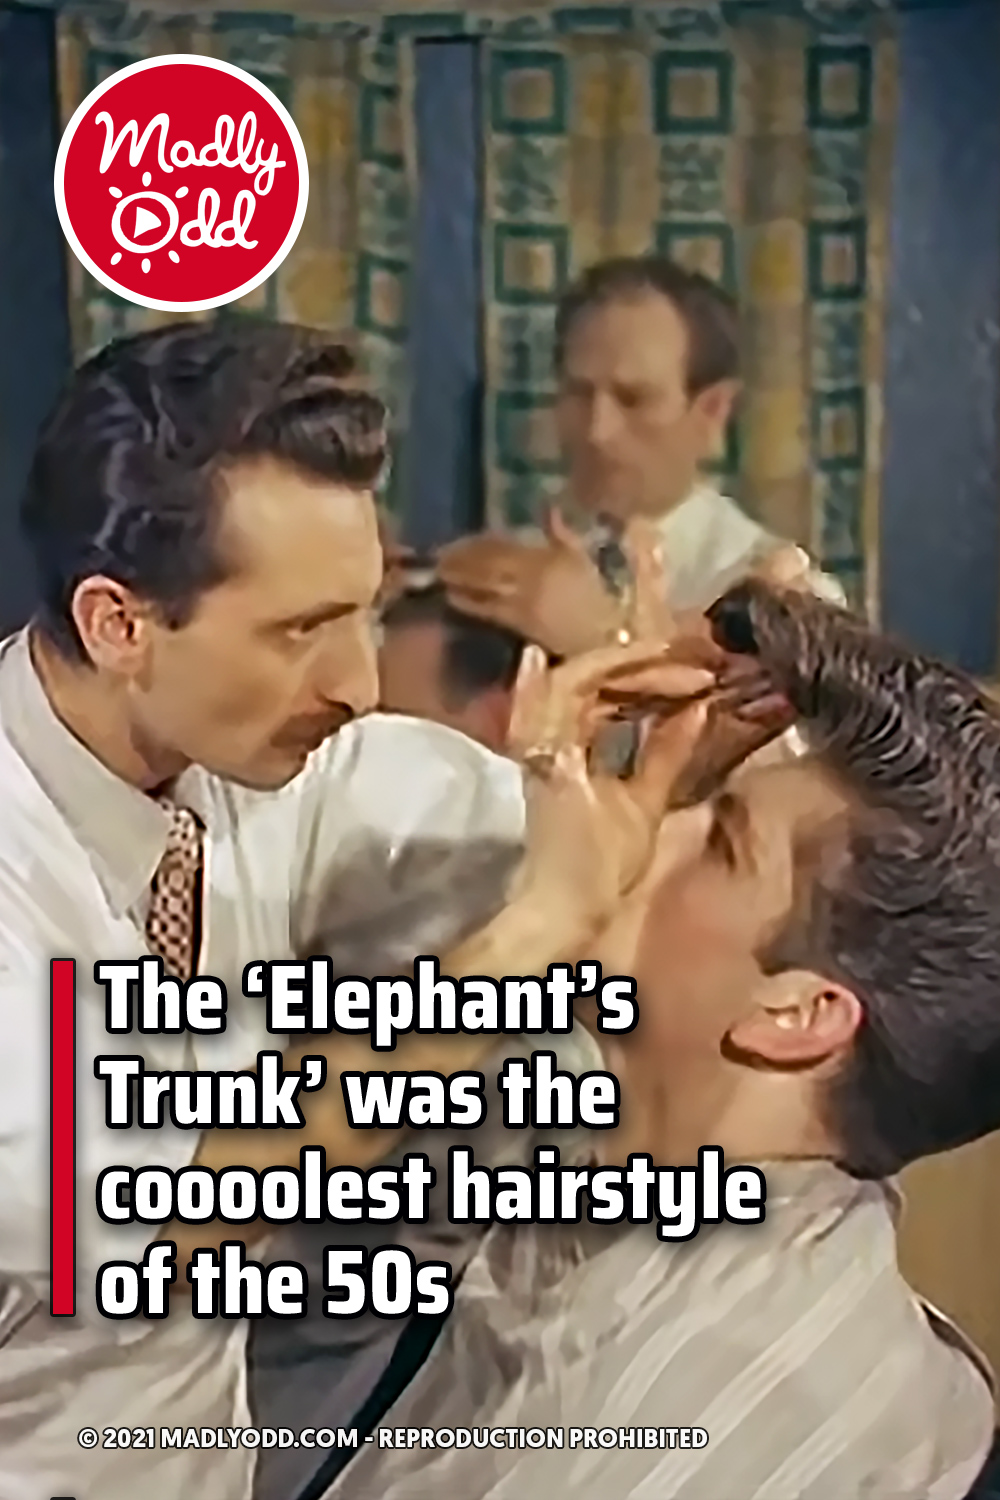 The ‘Elephant’s Trunk’ was the coooolest hairstyle of the 50s